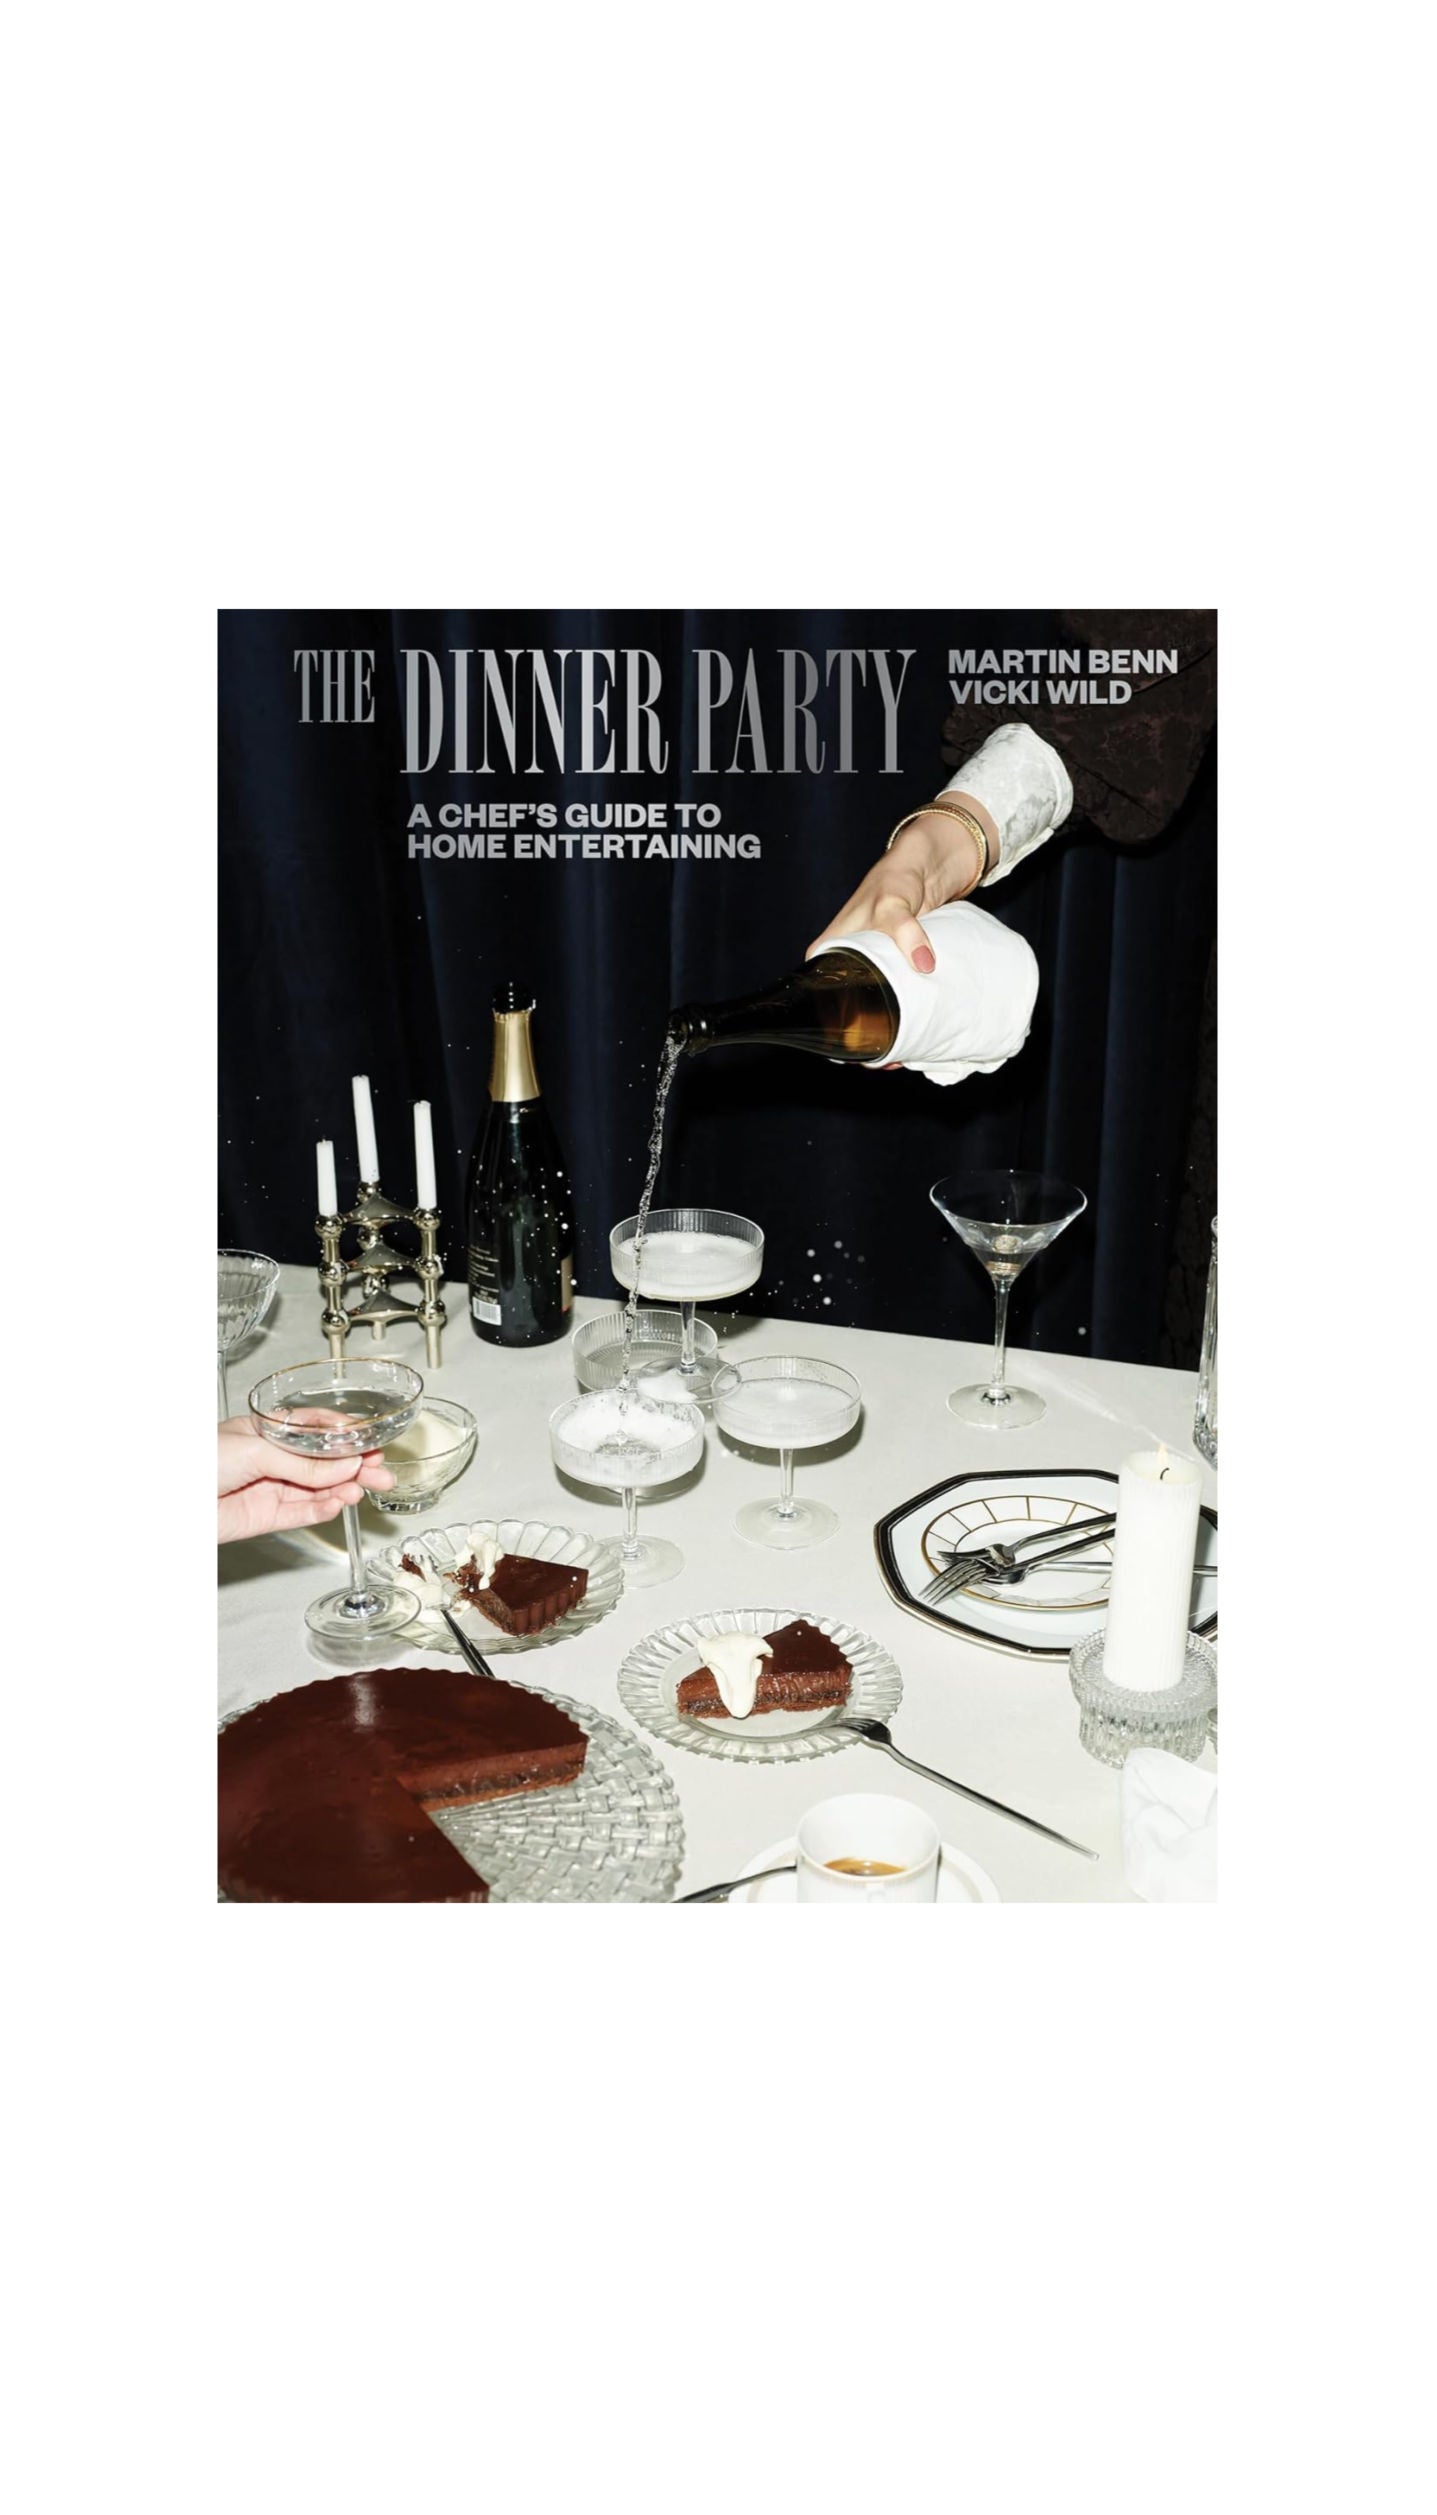 The Dinner Party: A Chef's Guide to Home Entertaining